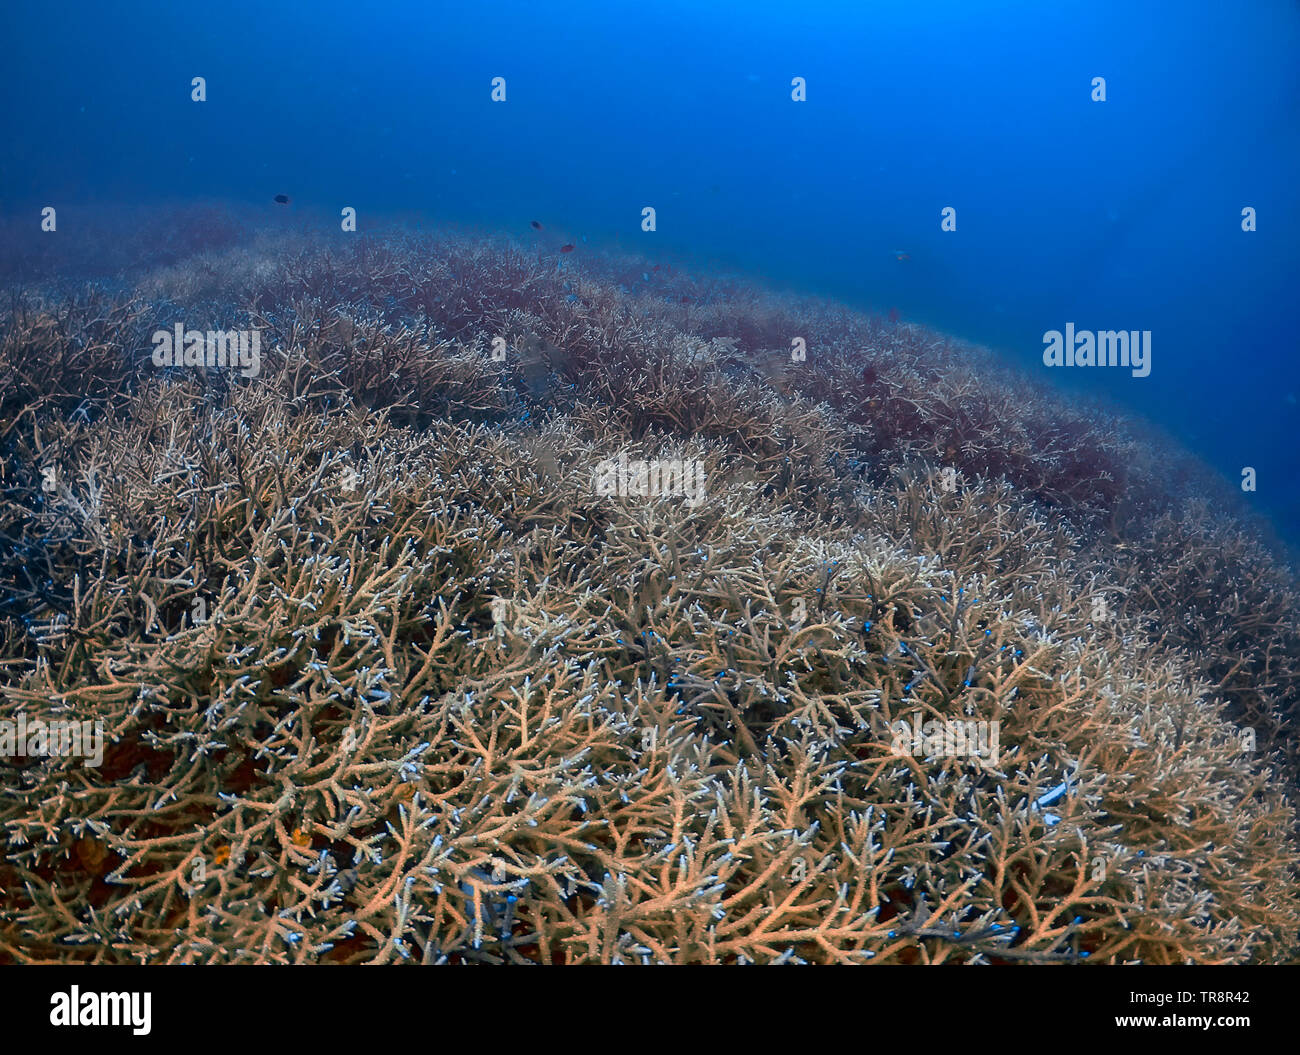 Extensive Branch Coral (Acropora florida) on a reef in El Nido, Palawan, Philippines Stock Photo